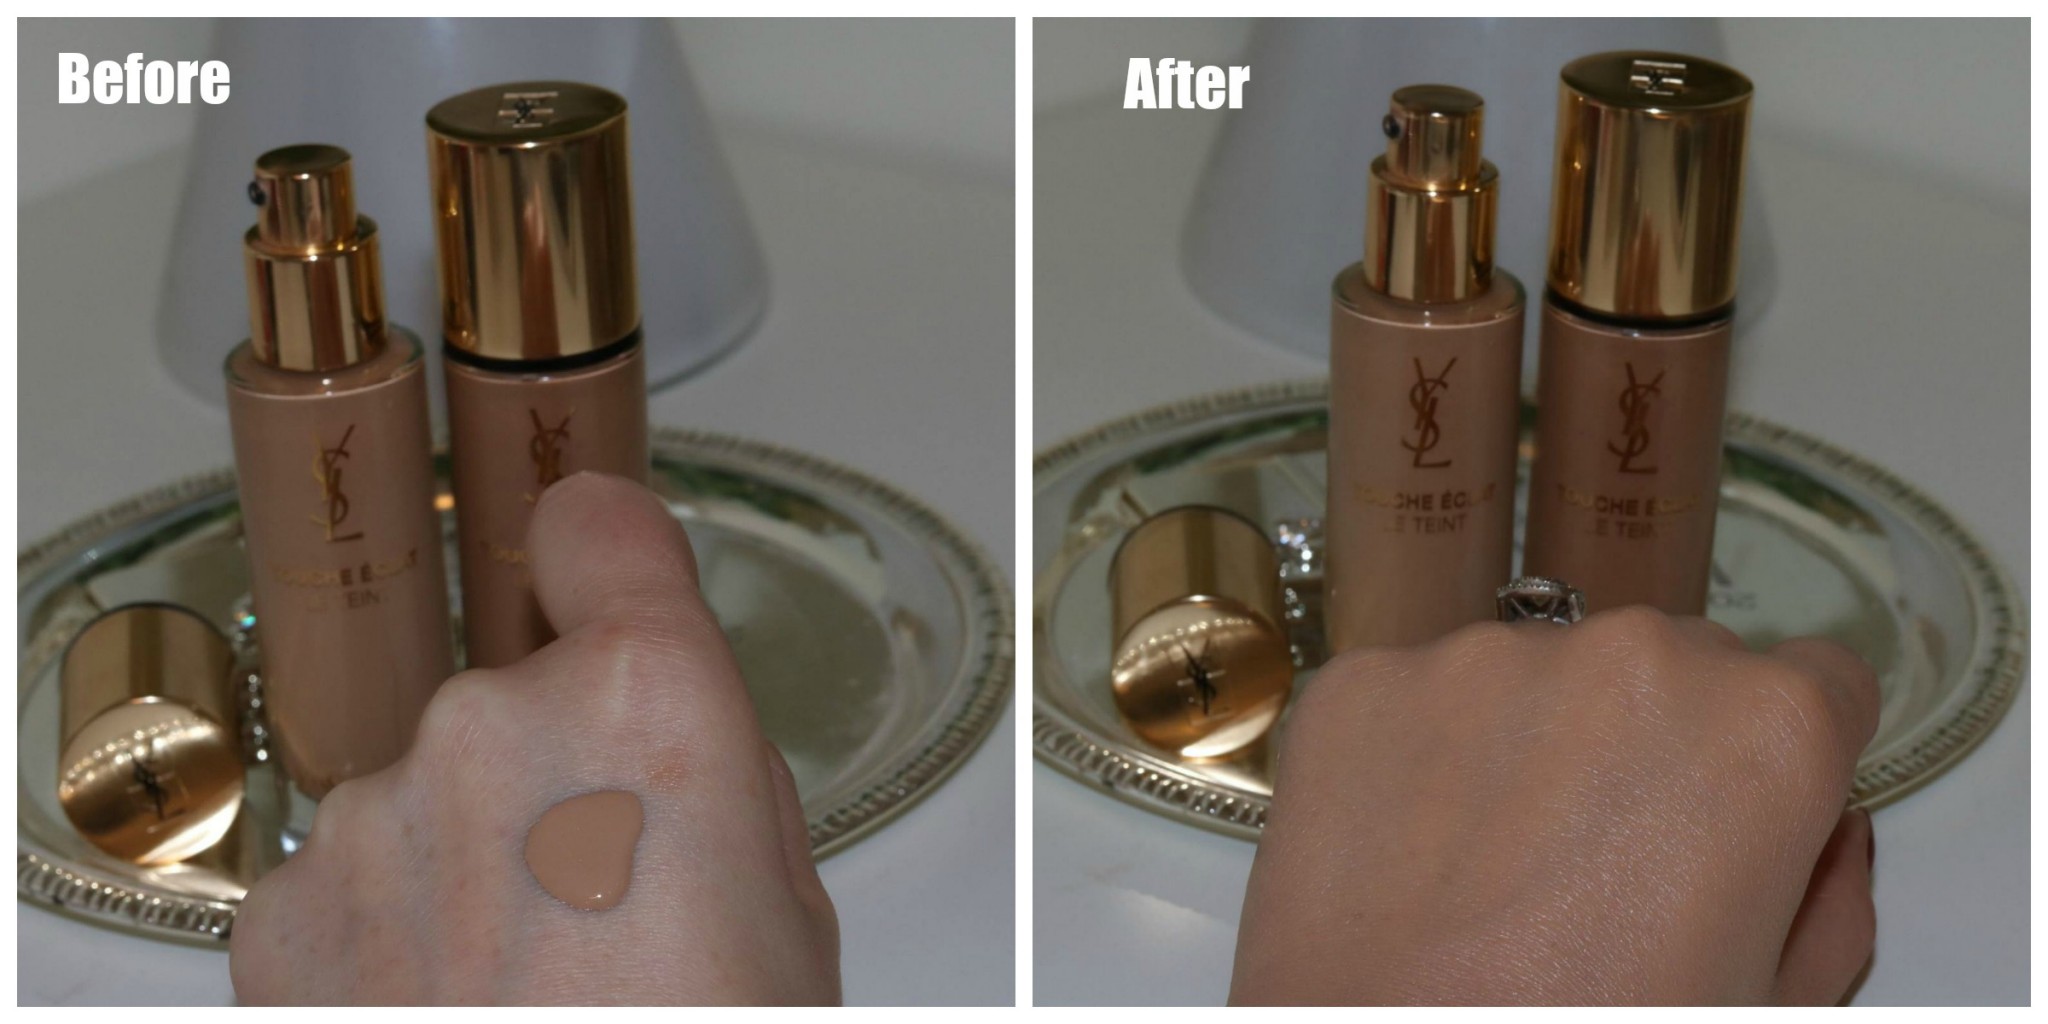 ysl foundation review main